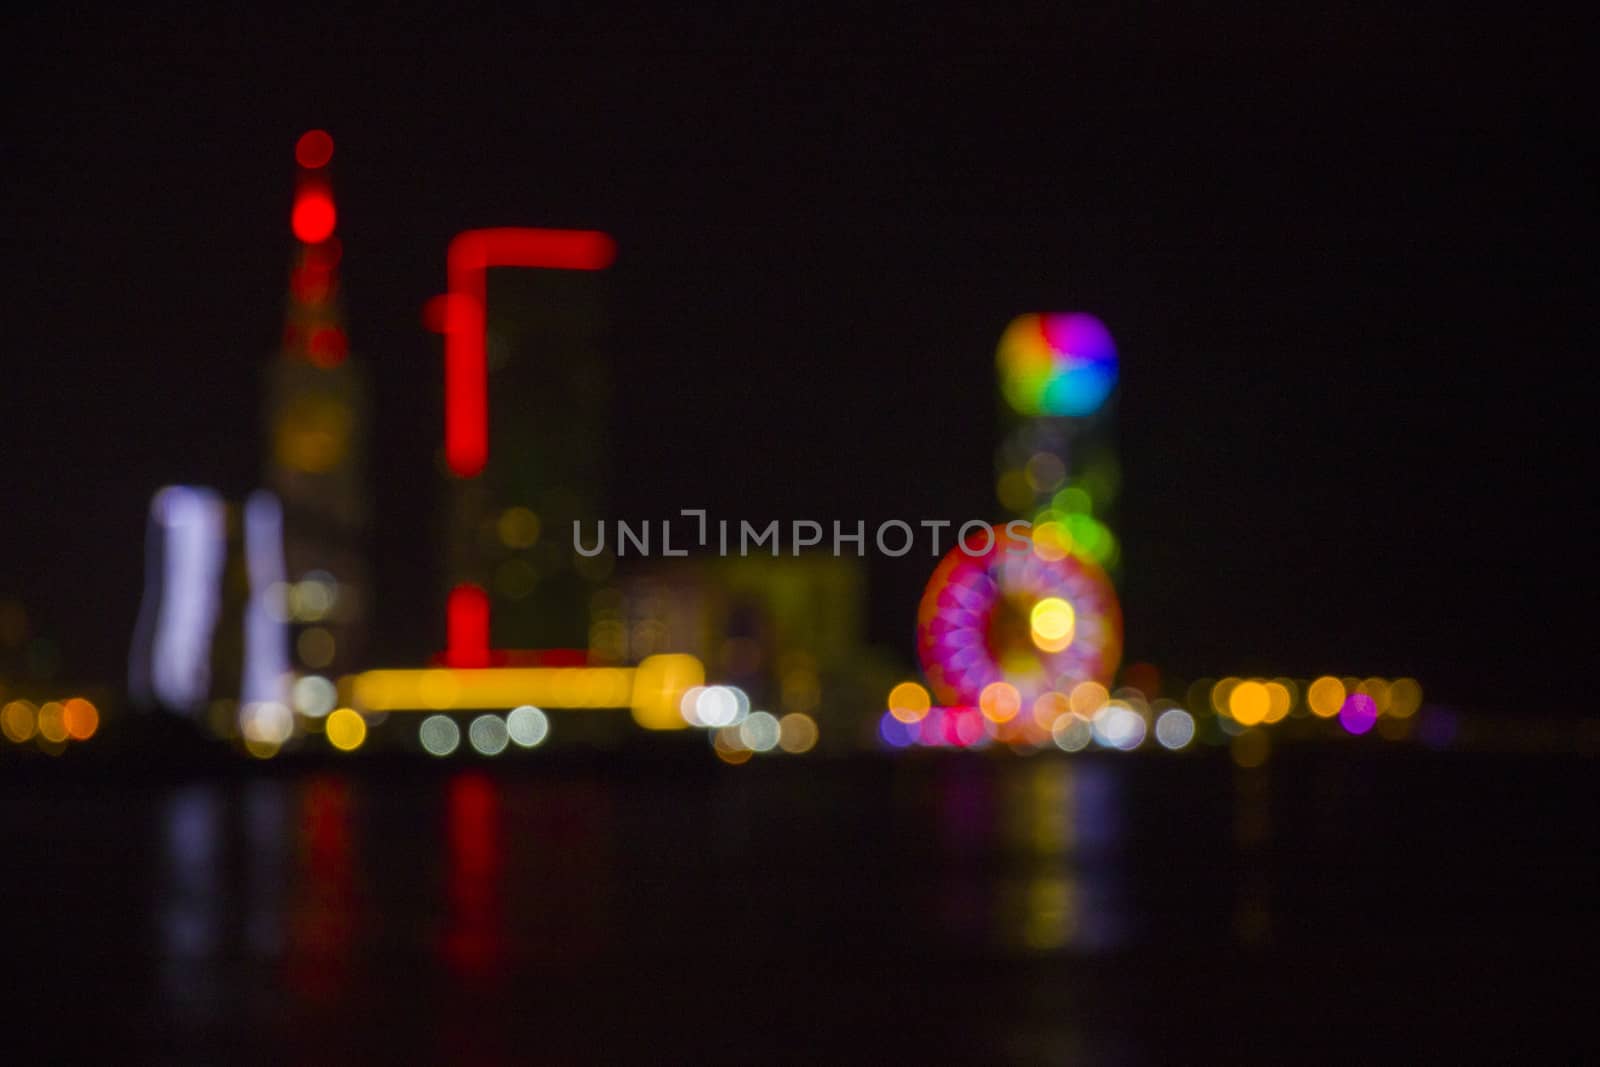 Batumi at night city view, unfocused and blur photo of skyscrapers and towers. City view at night. by Taidundua